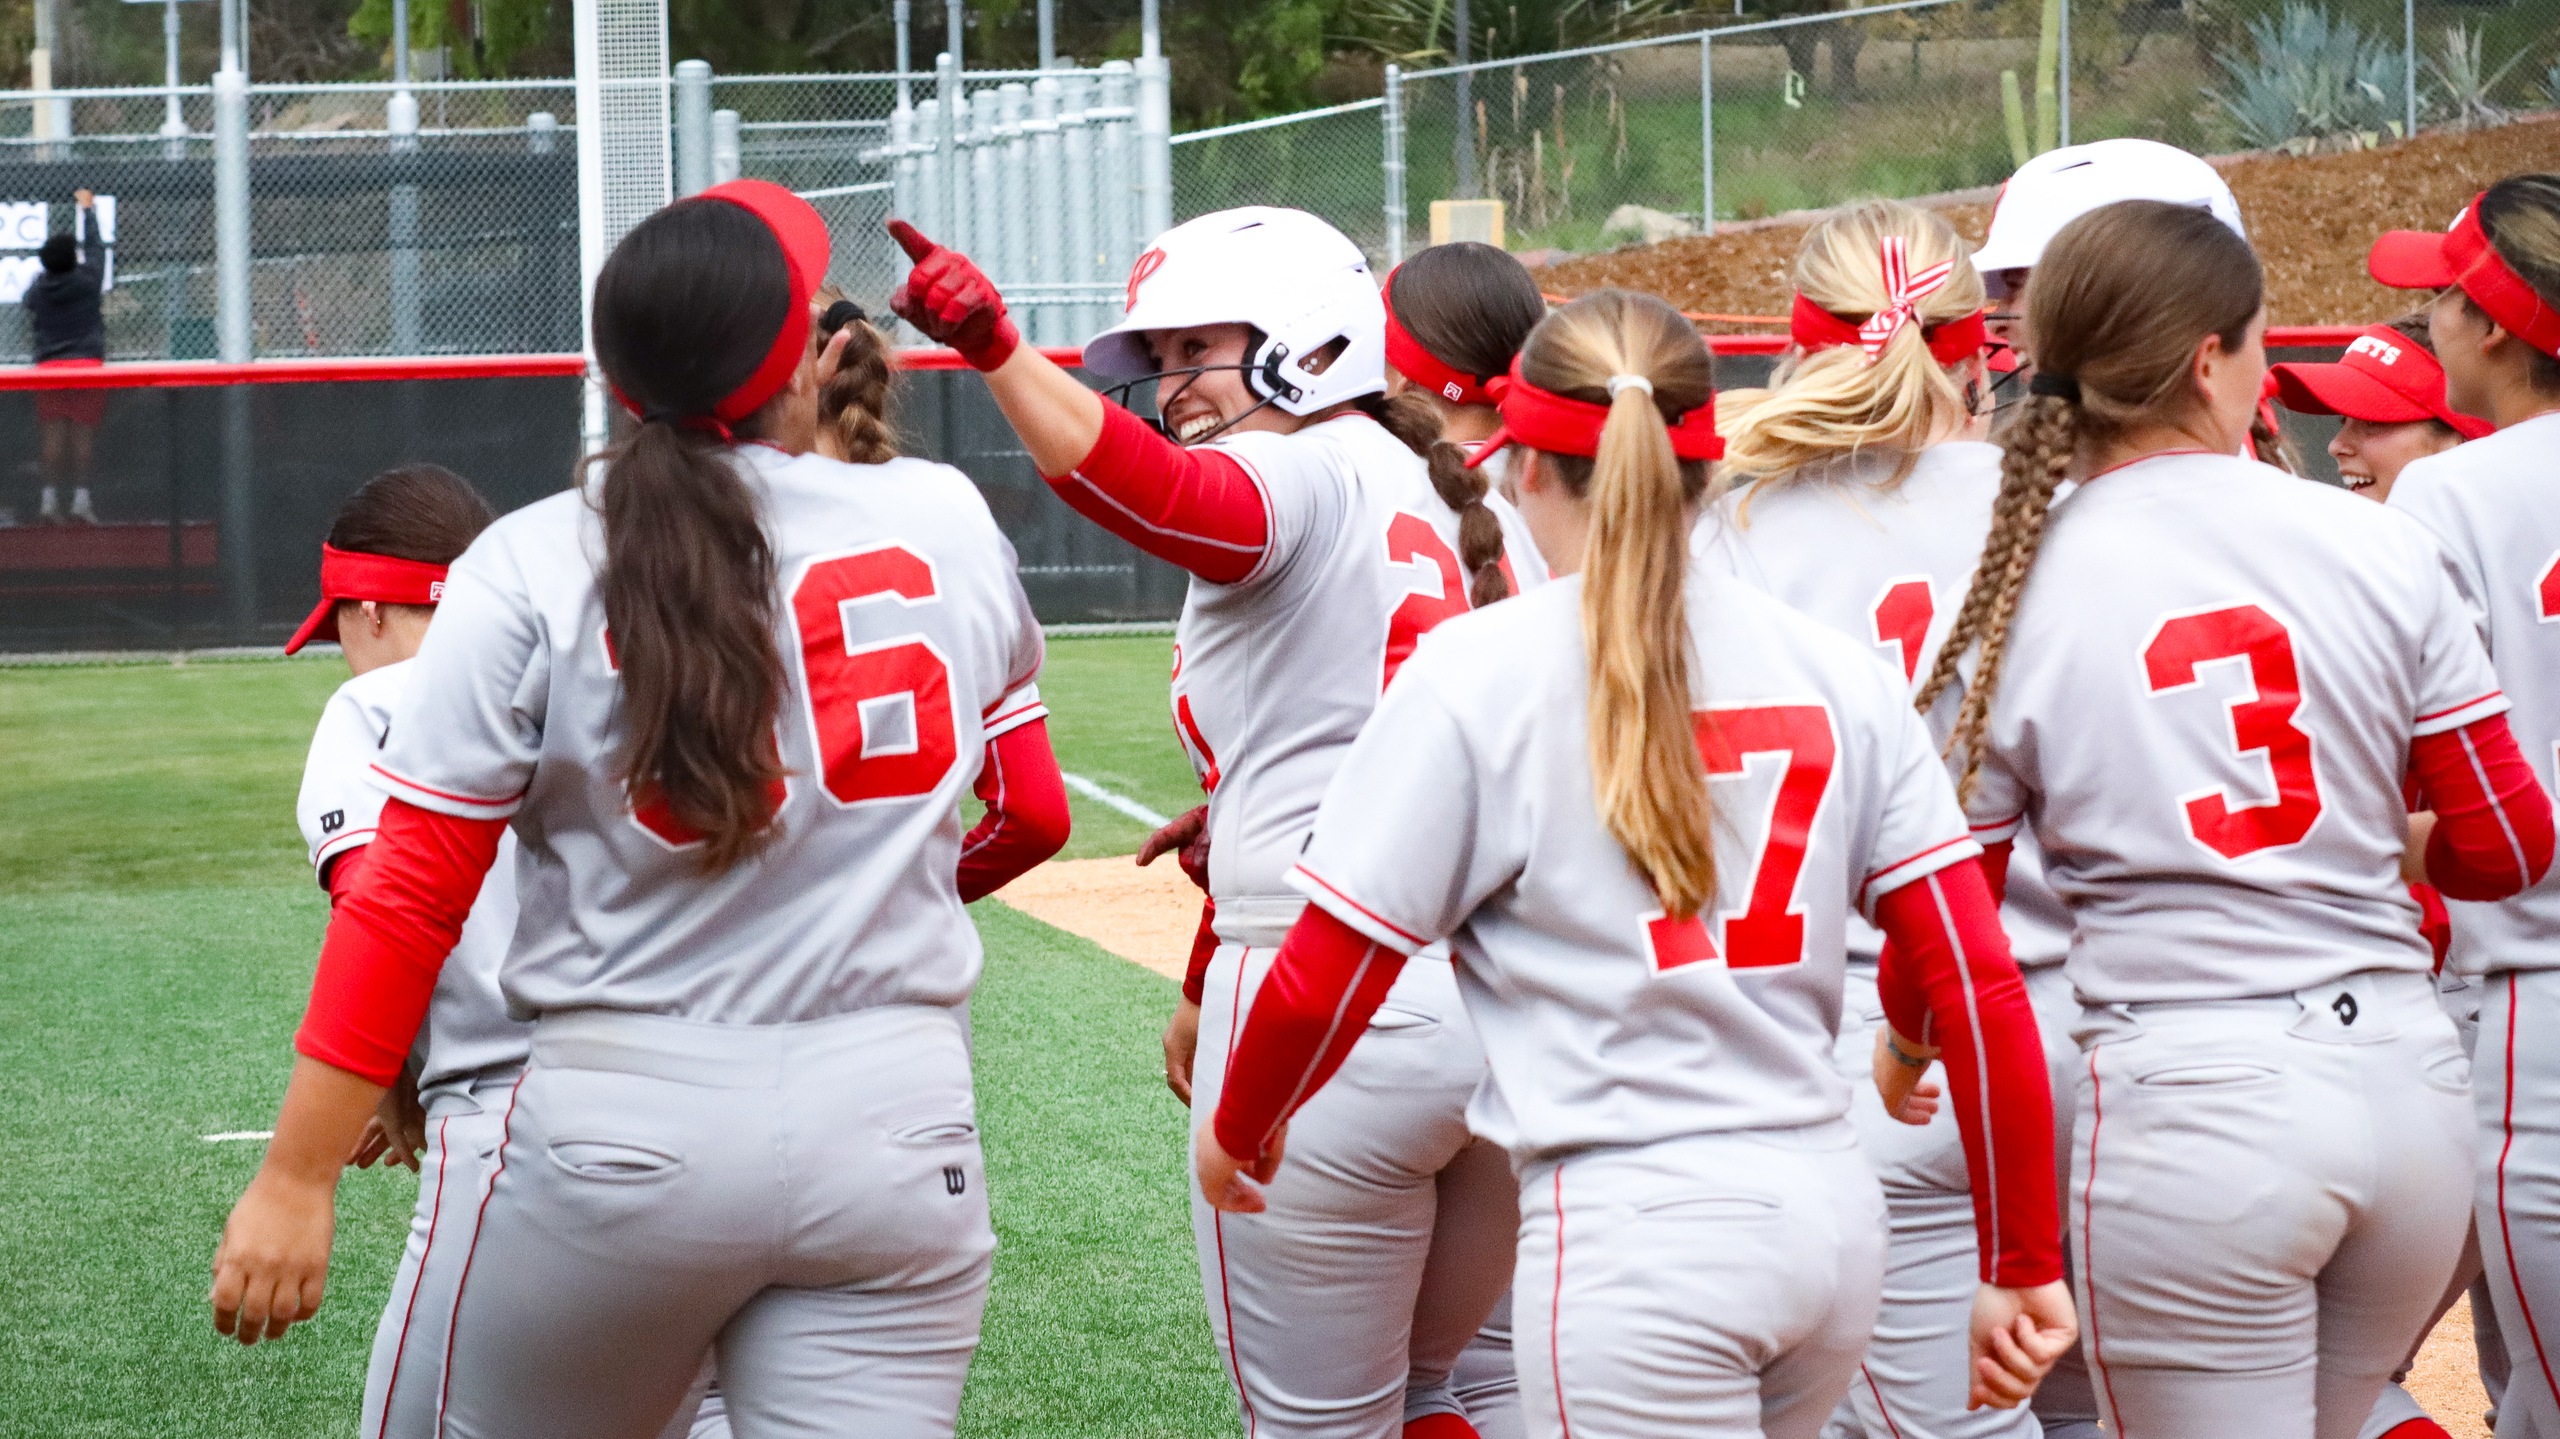 Breanna Lutz hit two home runs on Saturday afternoon. Photo by Cara Heise.